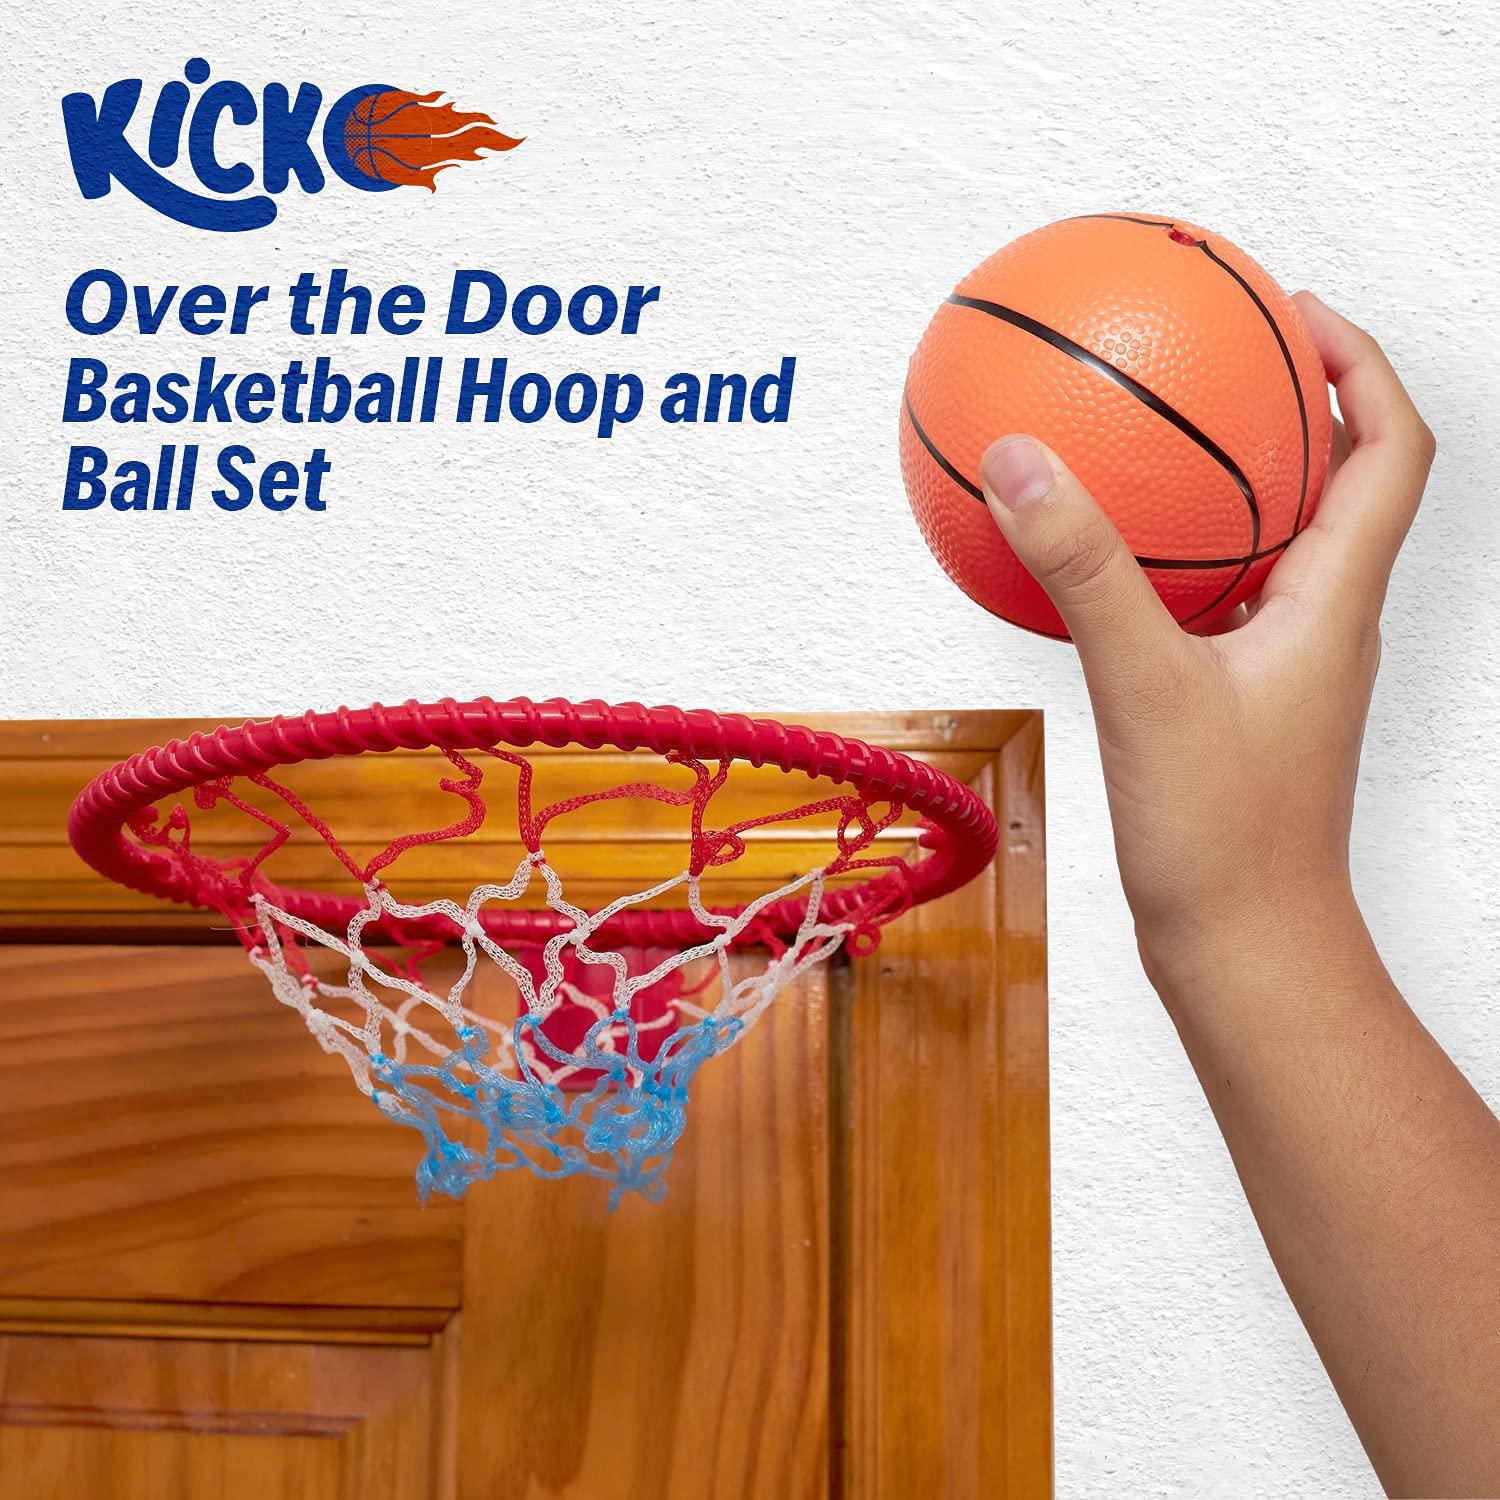 Kicko, Kicko 8-Inch Over the Door Basketball Hoop - with Mini Ball Set Or On the Wall - Fun Sports Game - Kids, Teens and Adults